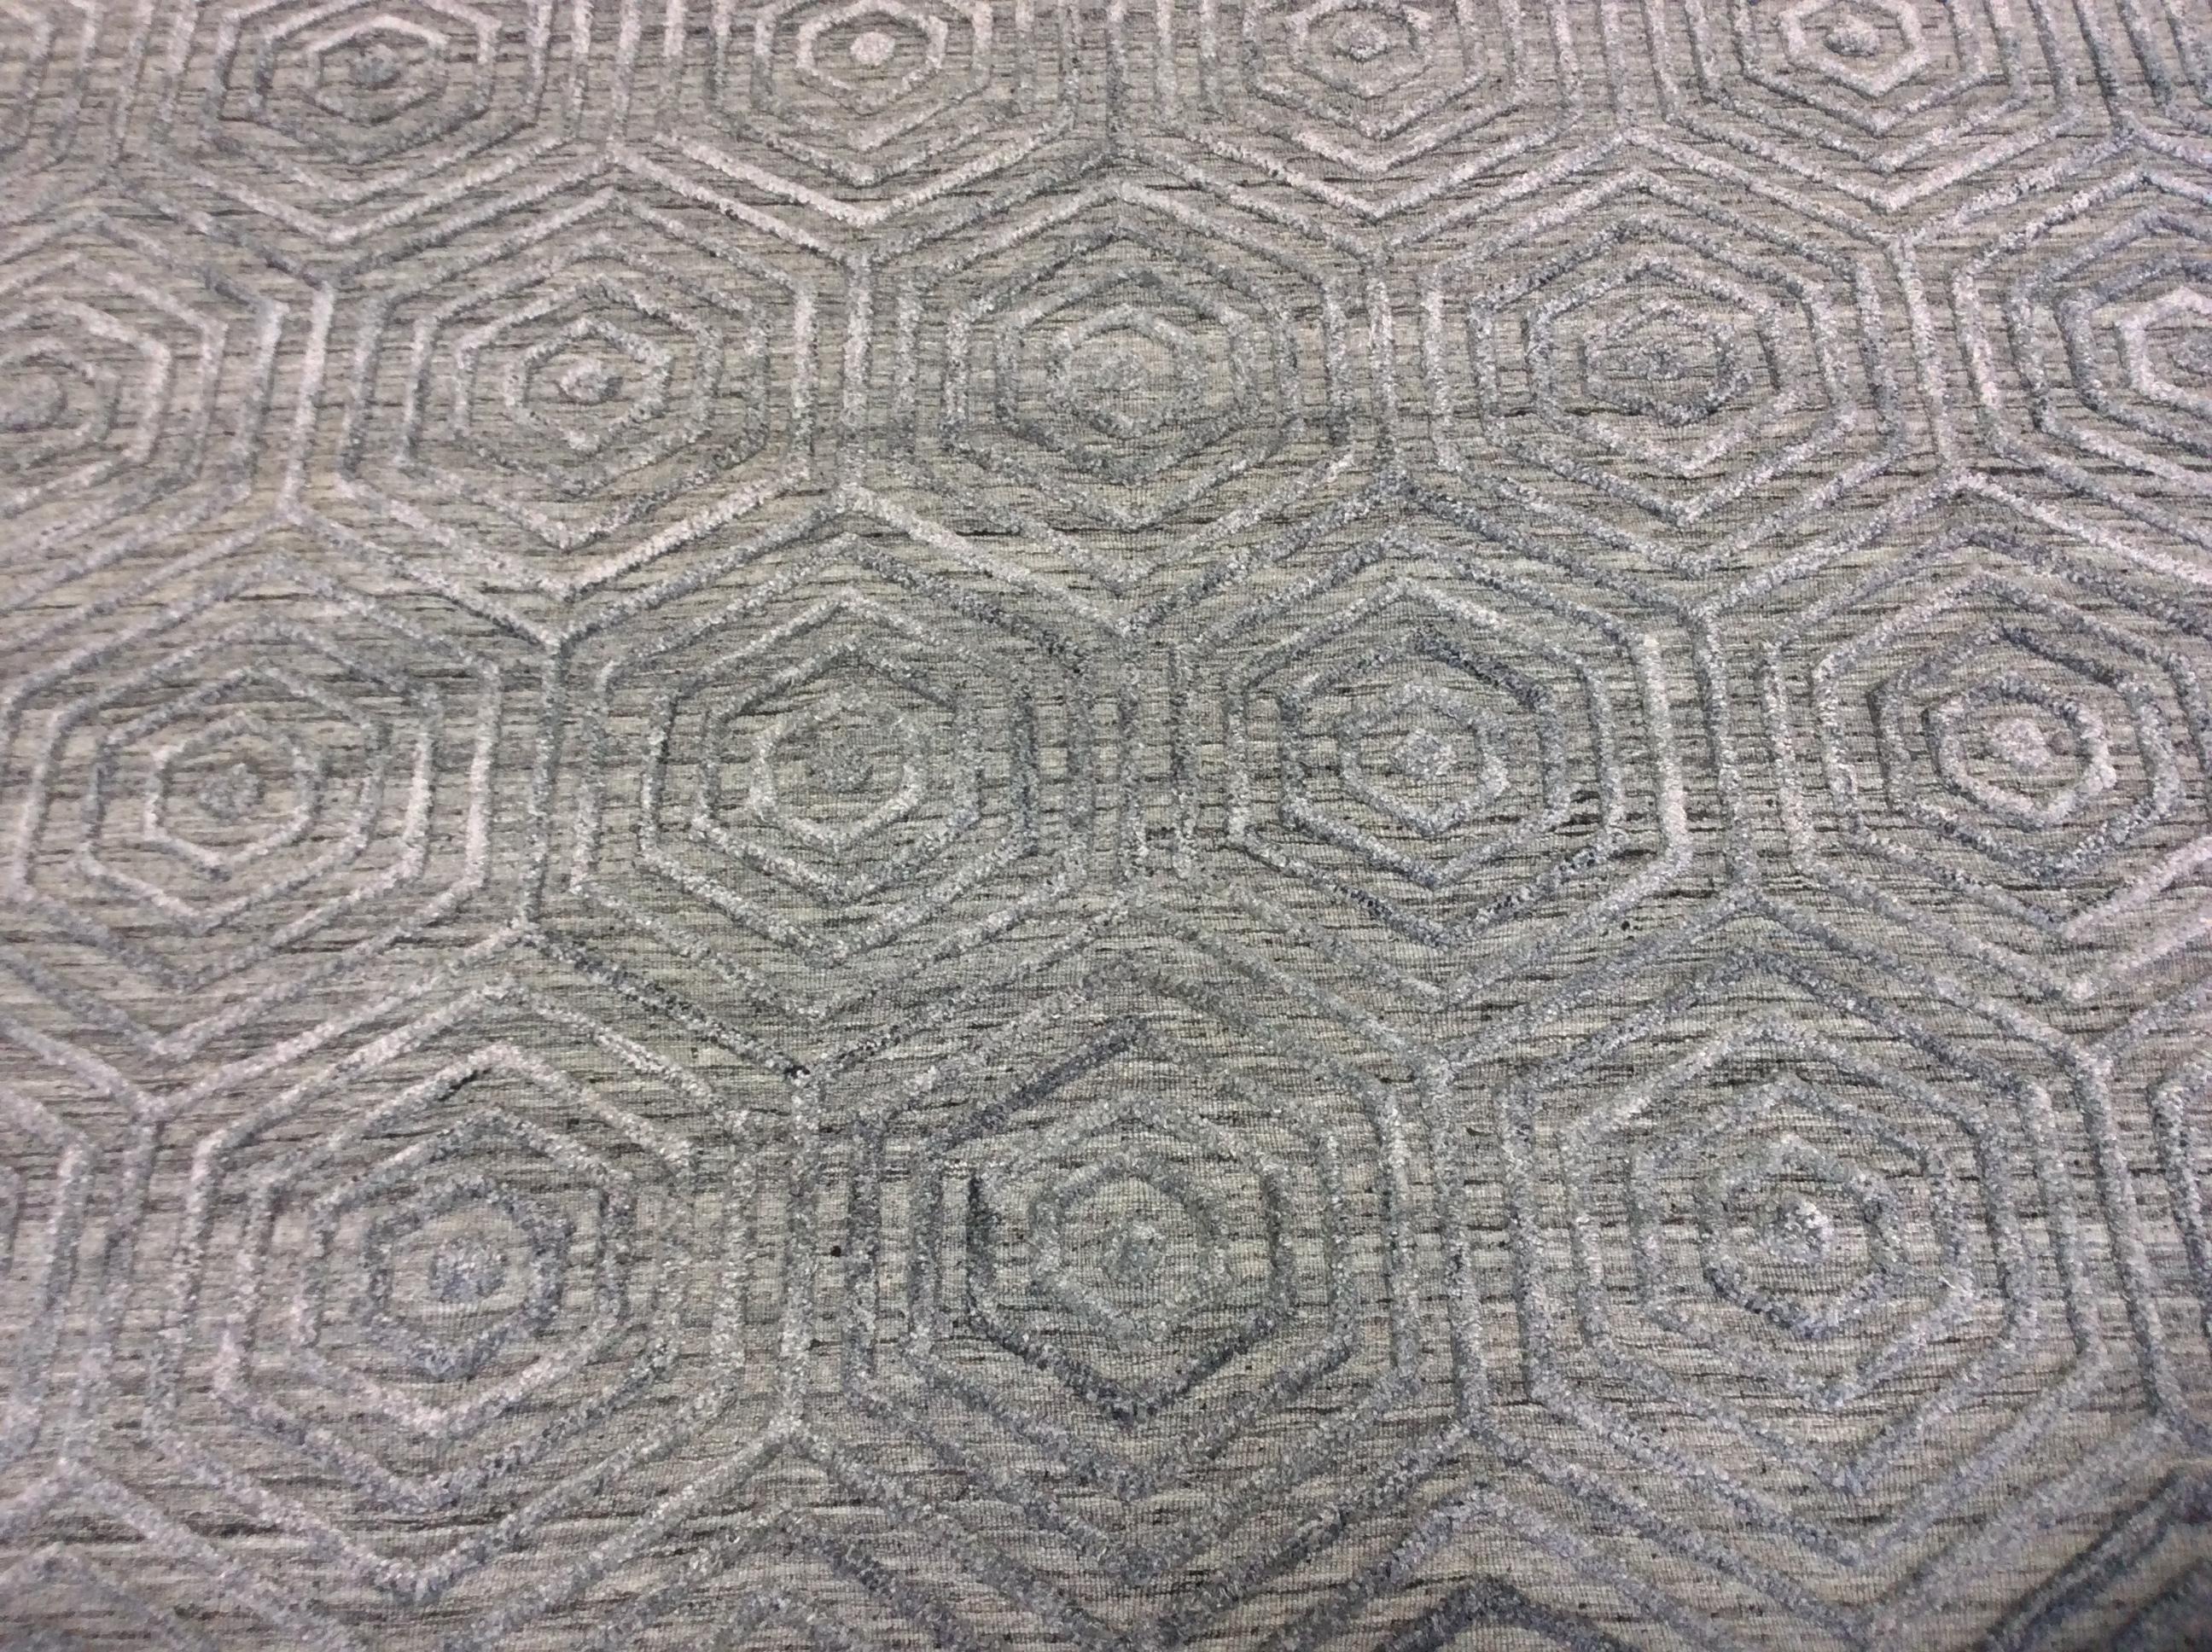 Hexagon high low contemporary rug in warm gray

High low design giving a casual yet polished look. With neutral color and raised geometry pattern.